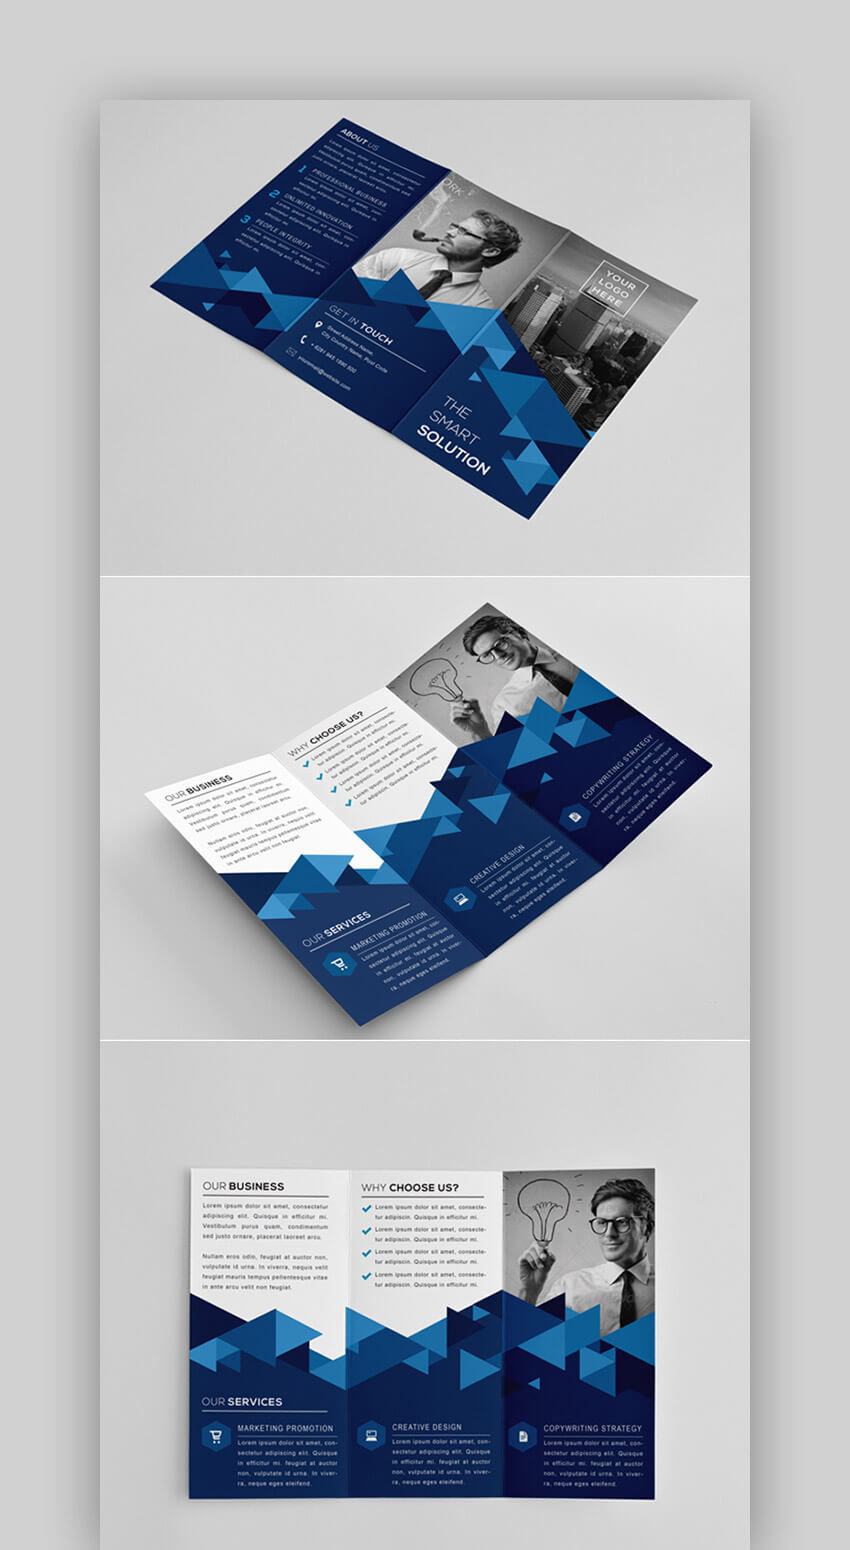 30 Best Indesign Brochure Templates – Creative Business With Regard To Brochure Templates Free Download Indesign